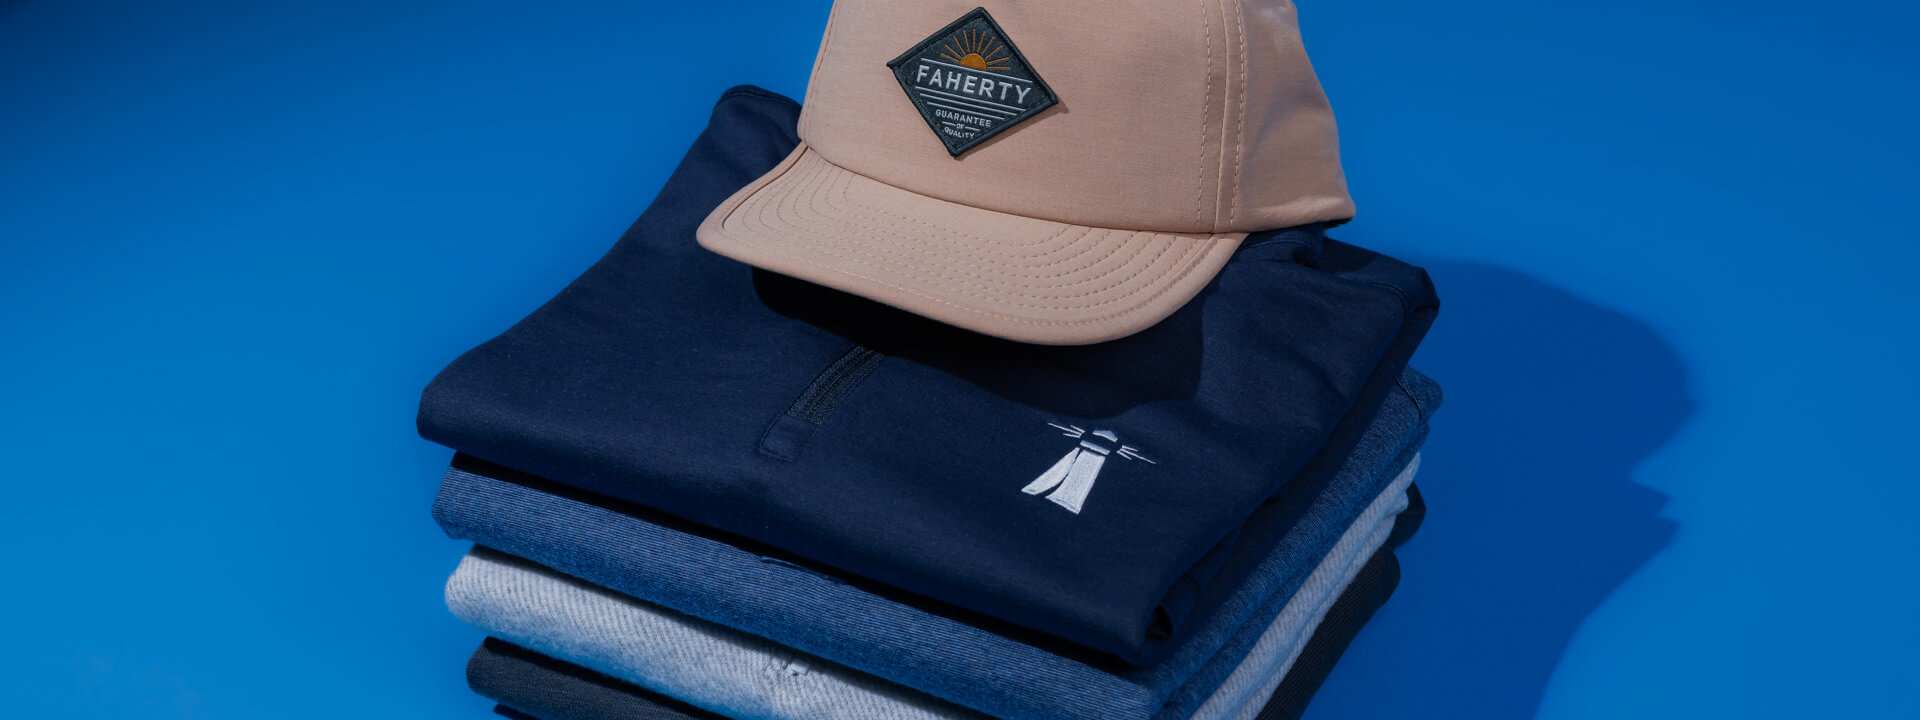 Faherty Brand Custom Embroidered Apparel – Corporate Gear